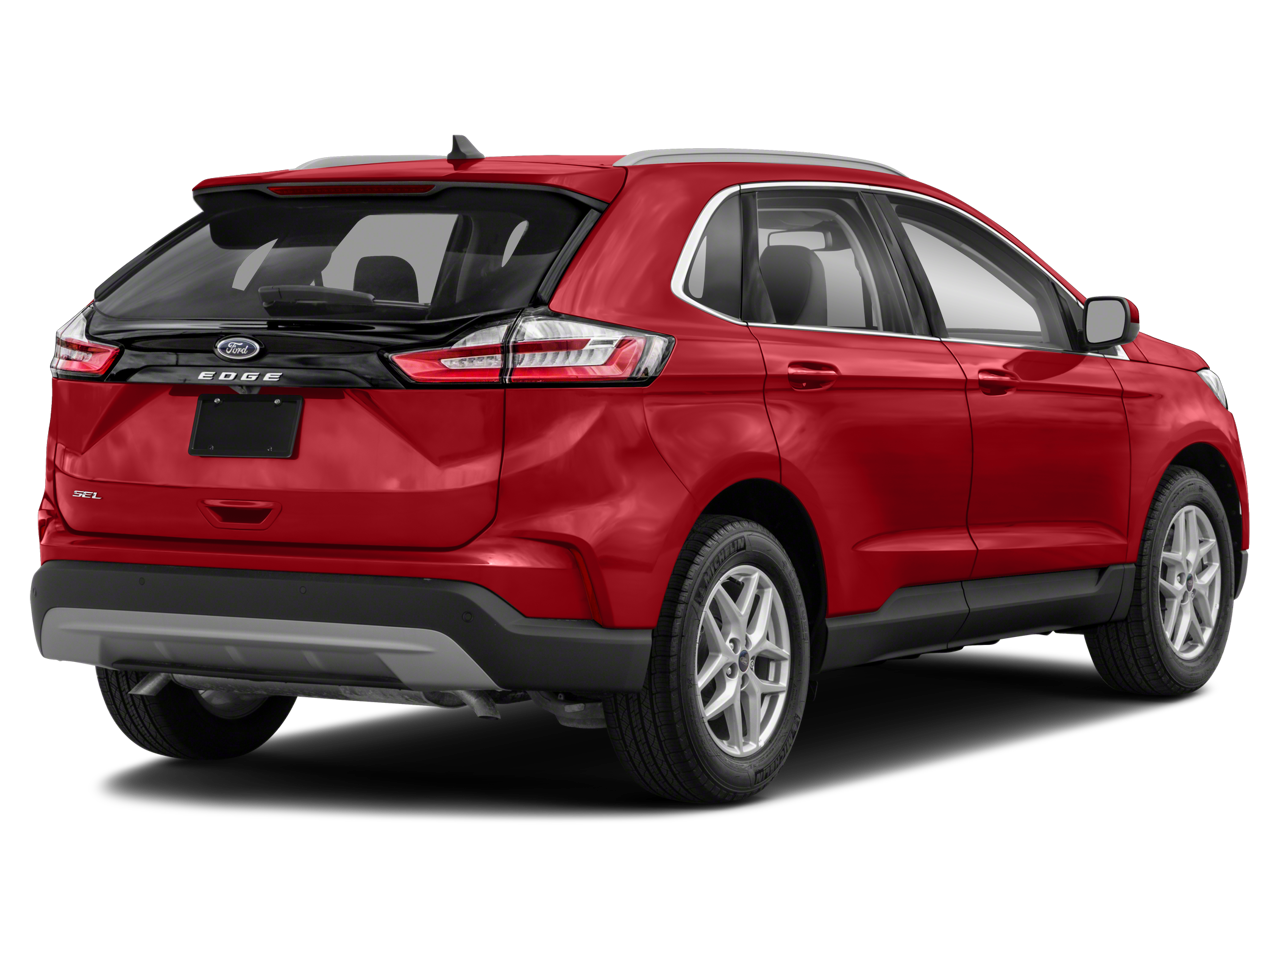 Used 2021 Ford Edge SEL with VIN 2FMPK4J9XMBA19586 for sale in Minneapolis, Minnesota